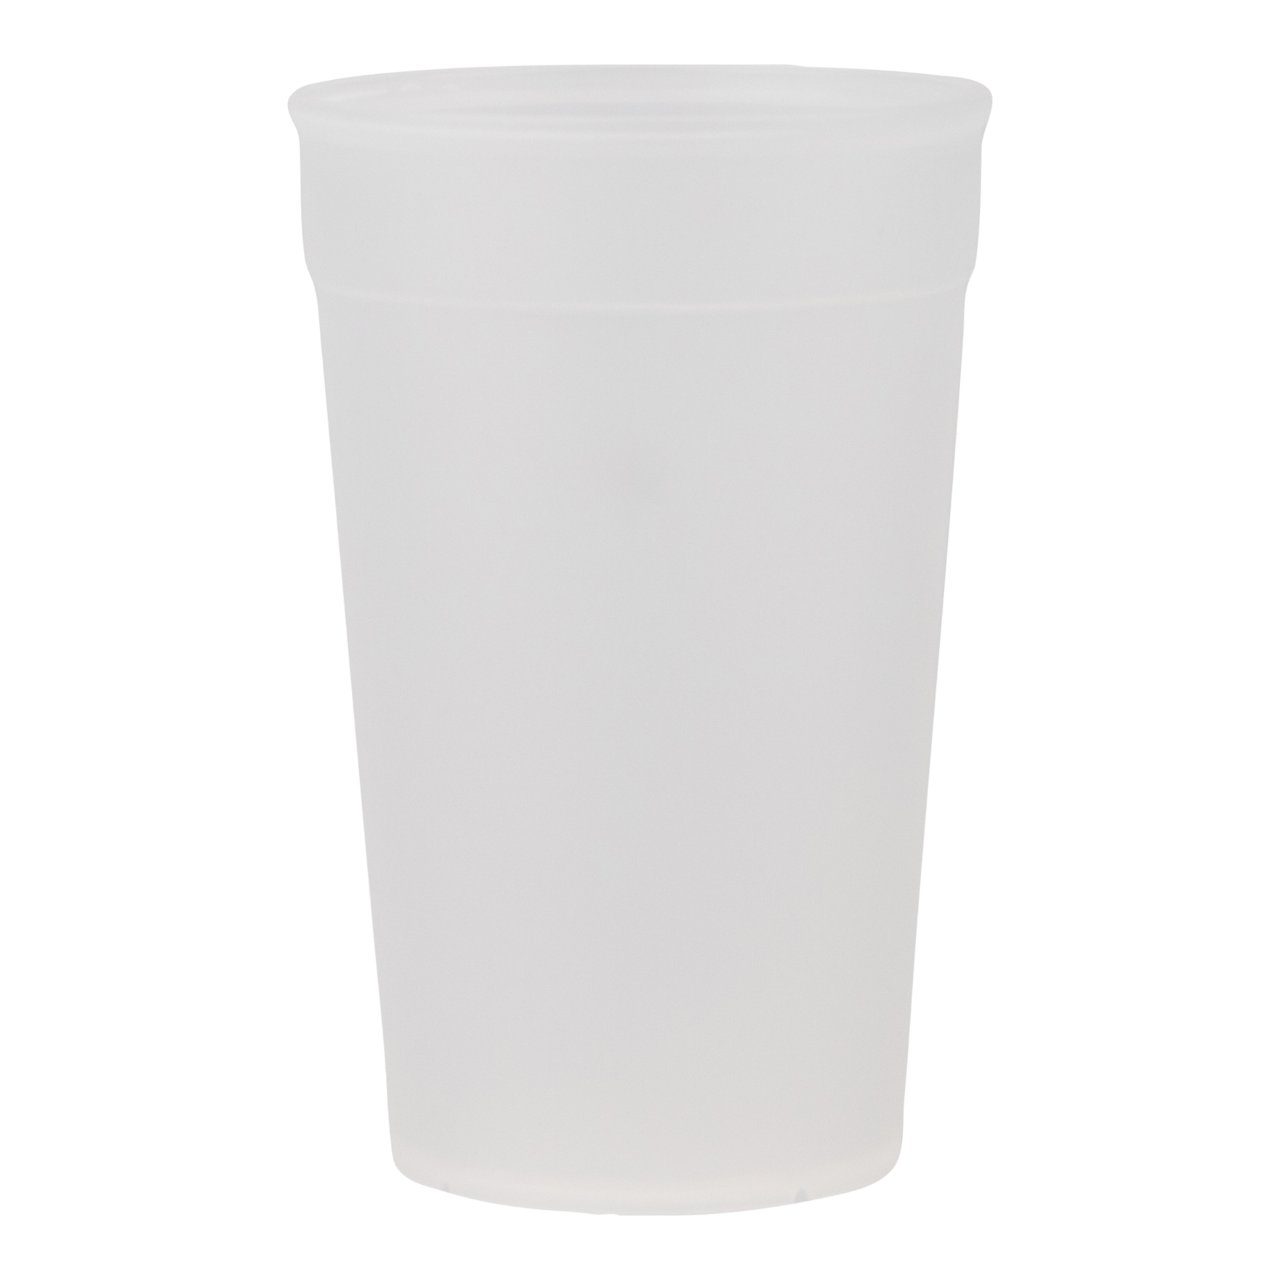 Reusable cup tra 300-380ml 20st